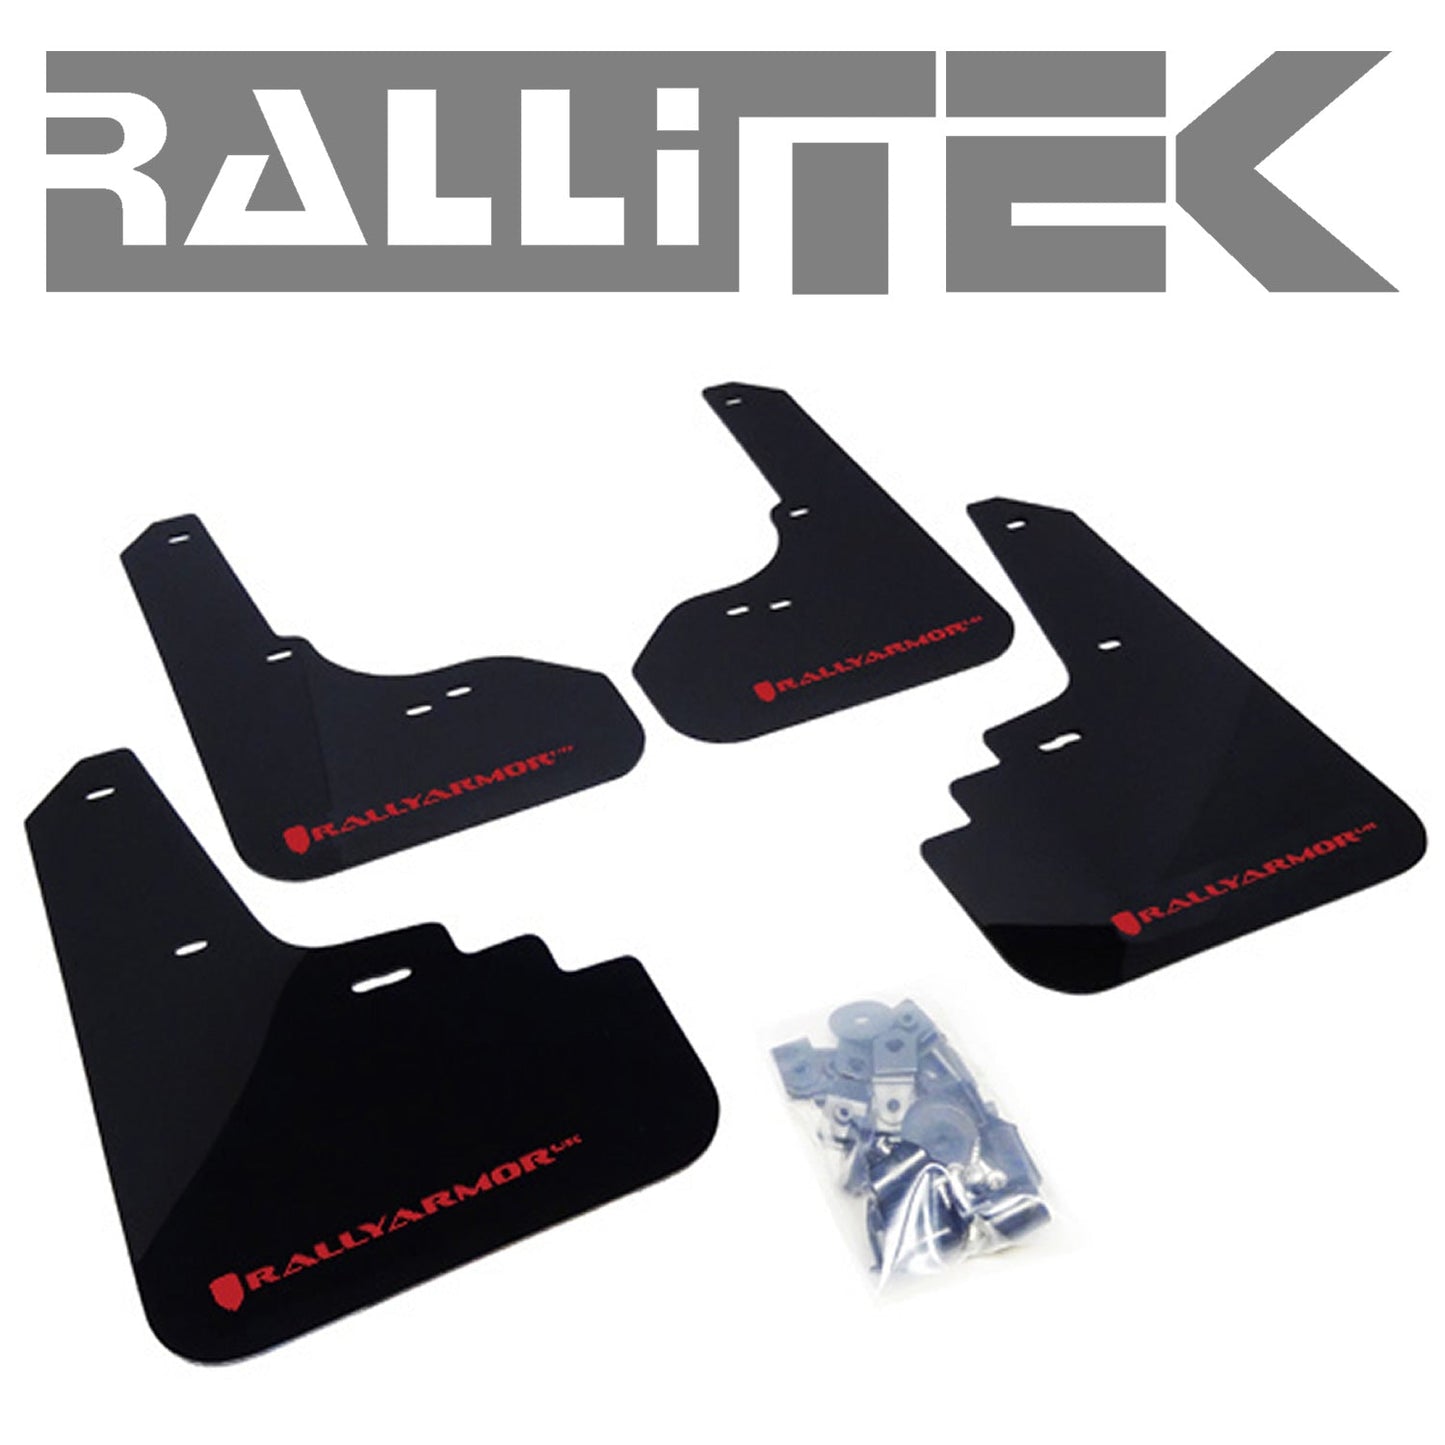 Rally Armor UR Mud Flaps - Legacy & Outback 2005-2009